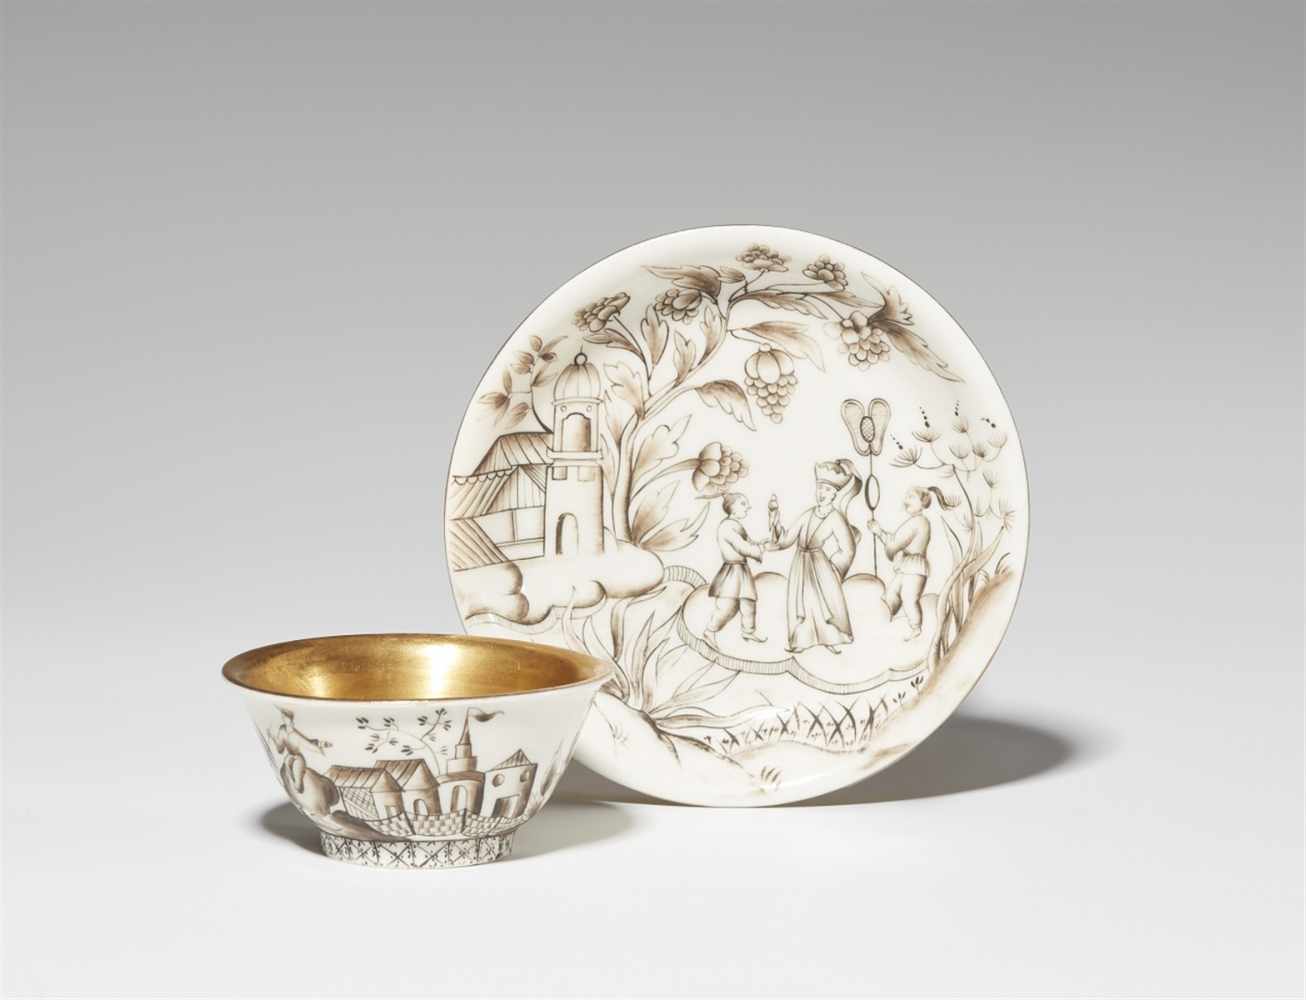 A Böttger porcelain tea bowl with chinoiserie decorTapering cup with original saucer. Decorated